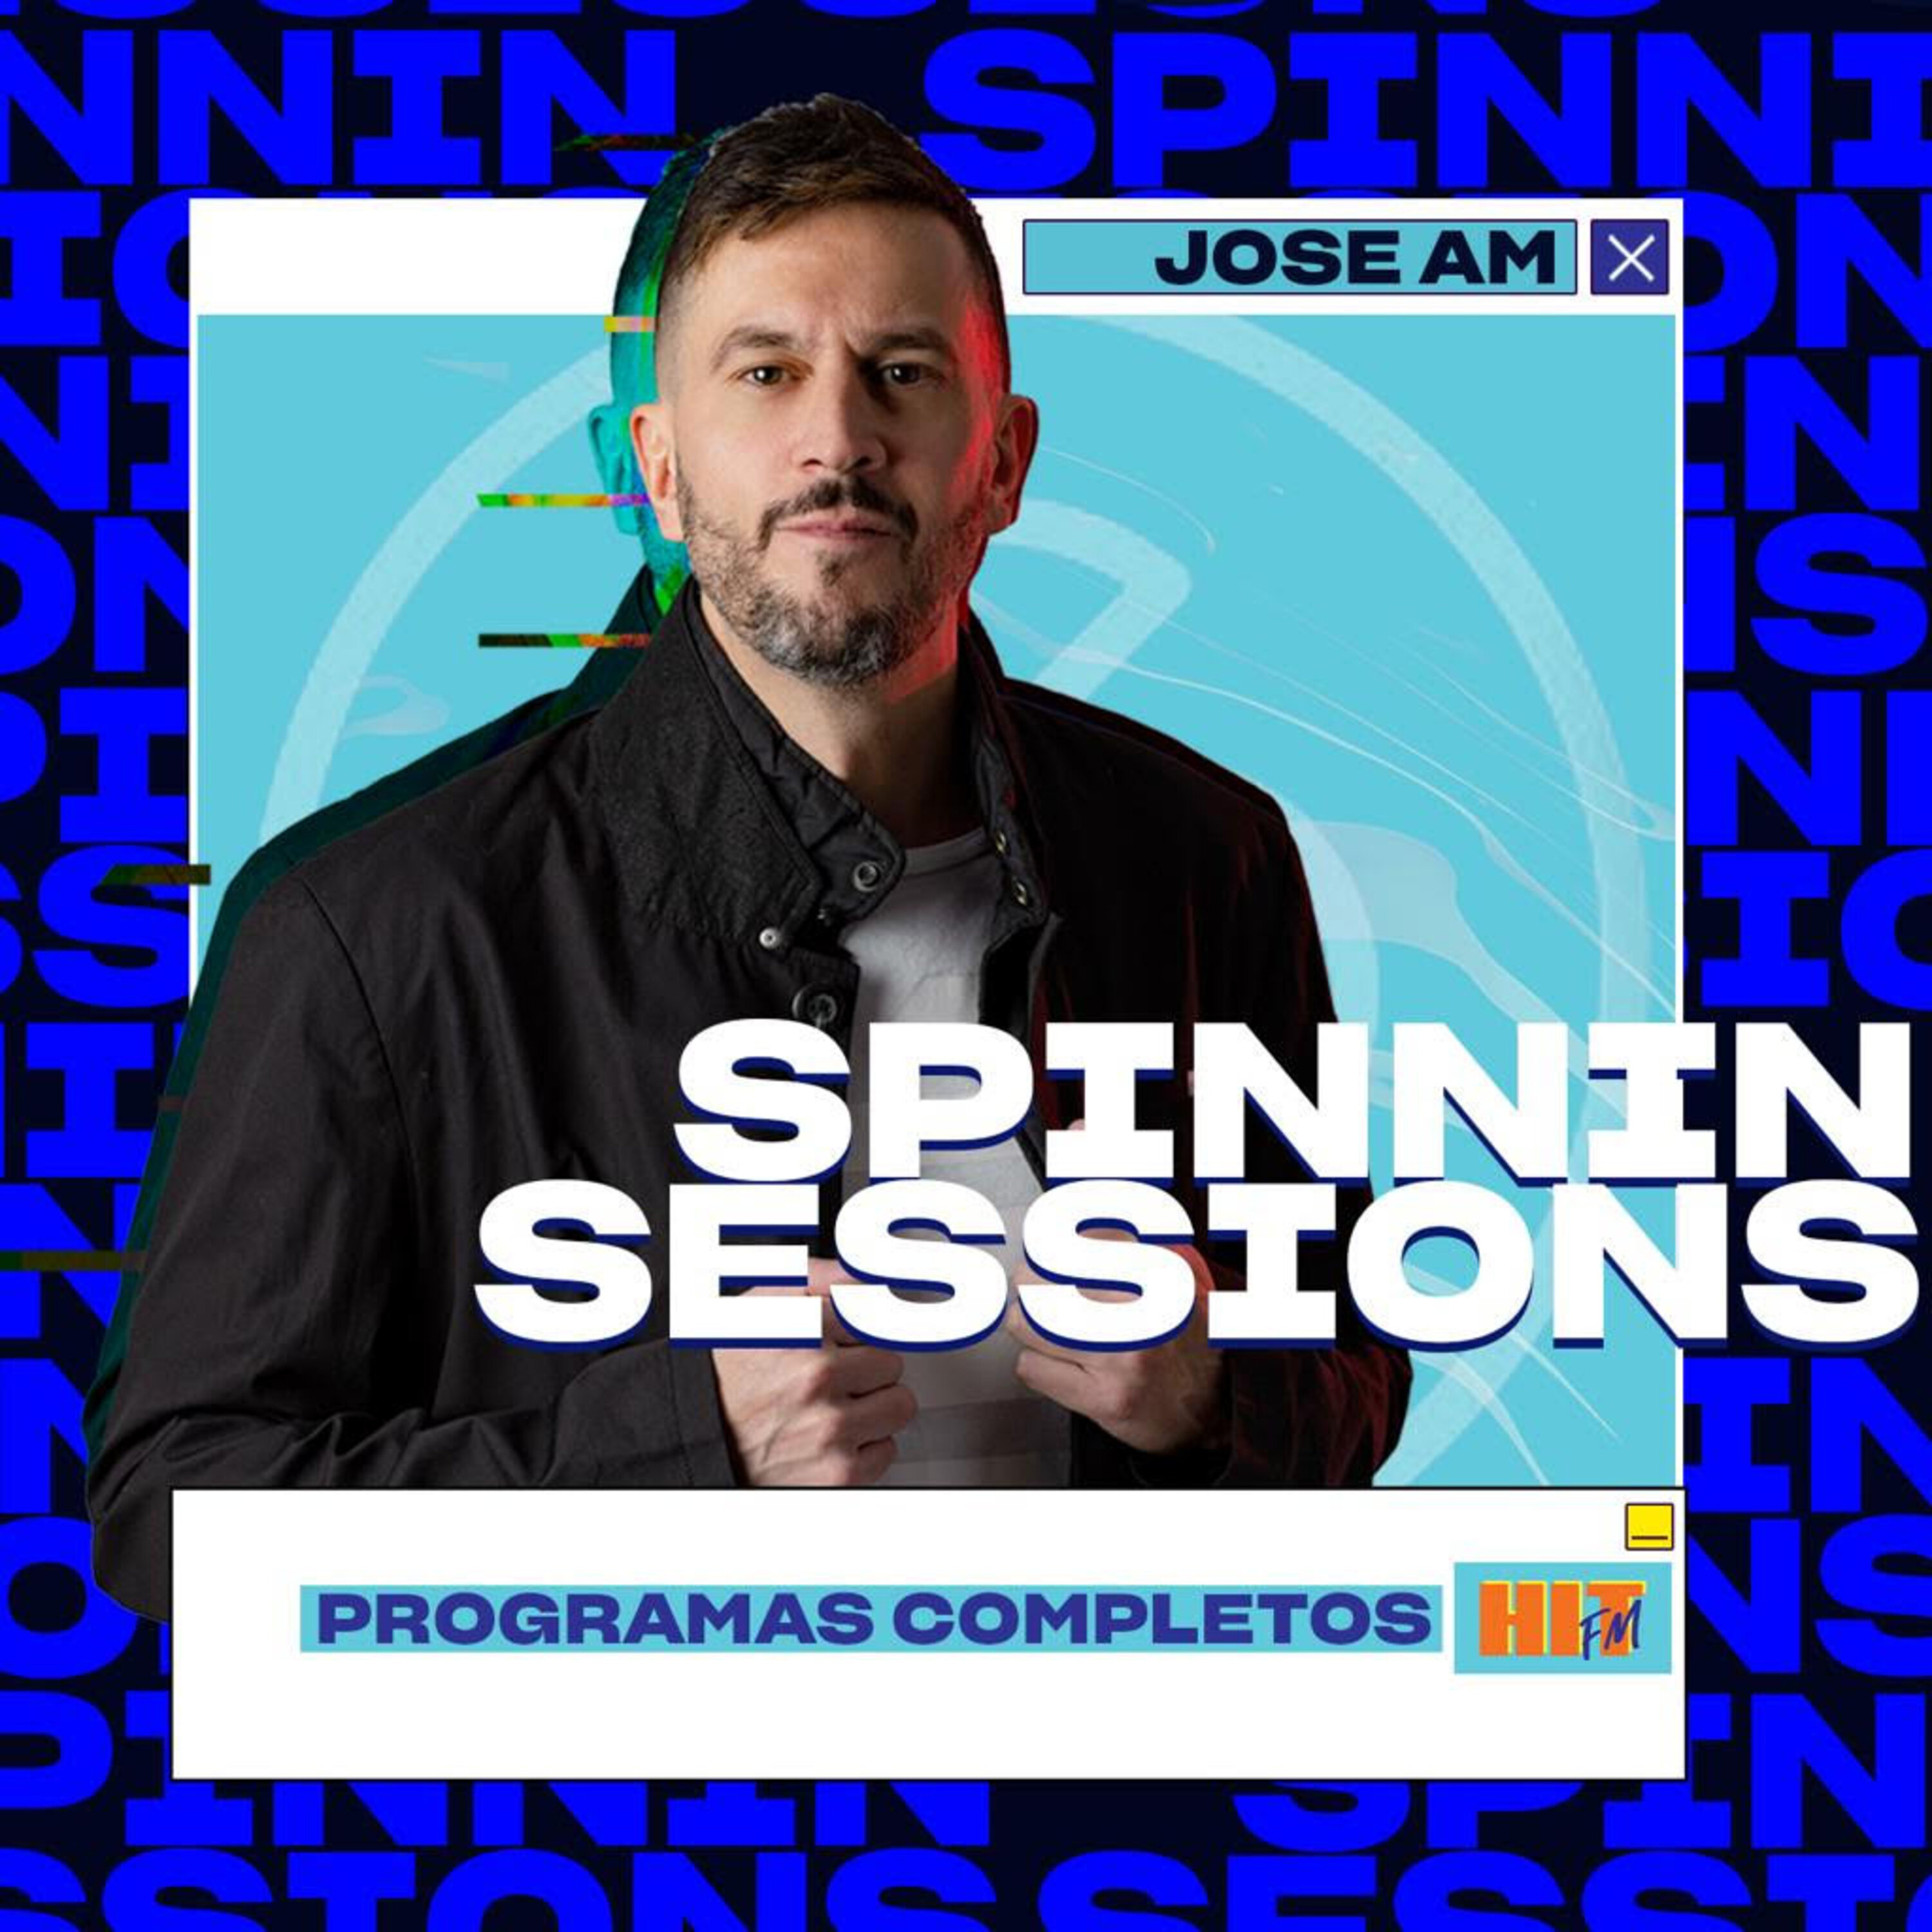 Spinnin Sessions con Jose AM (22/08/2022)